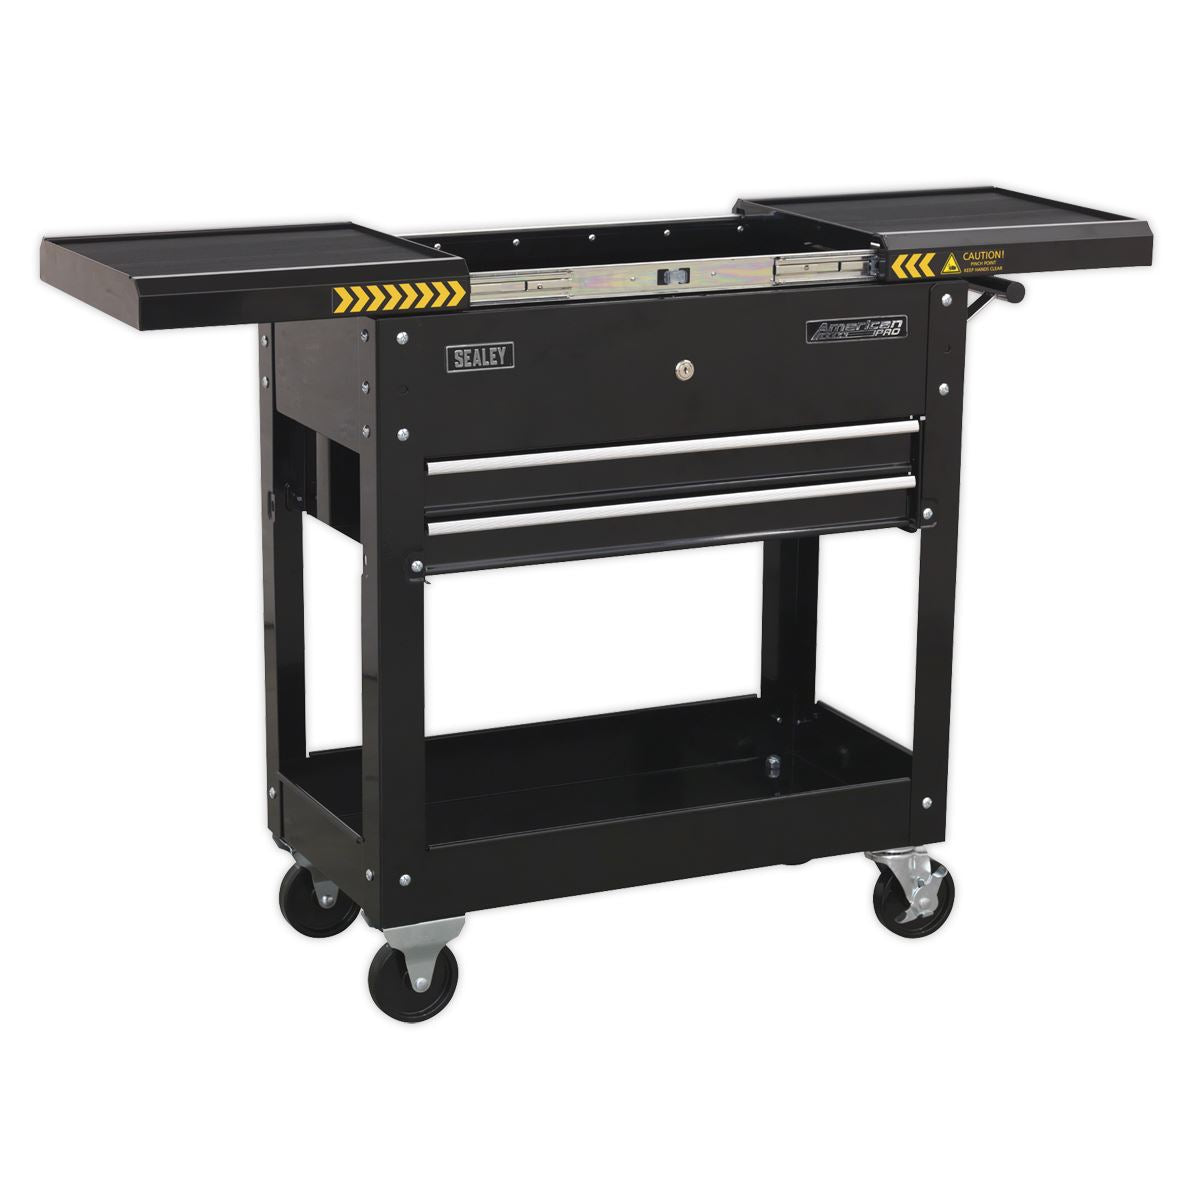 Sealey American Pro Mobile Tool & Parts Trolley - Black